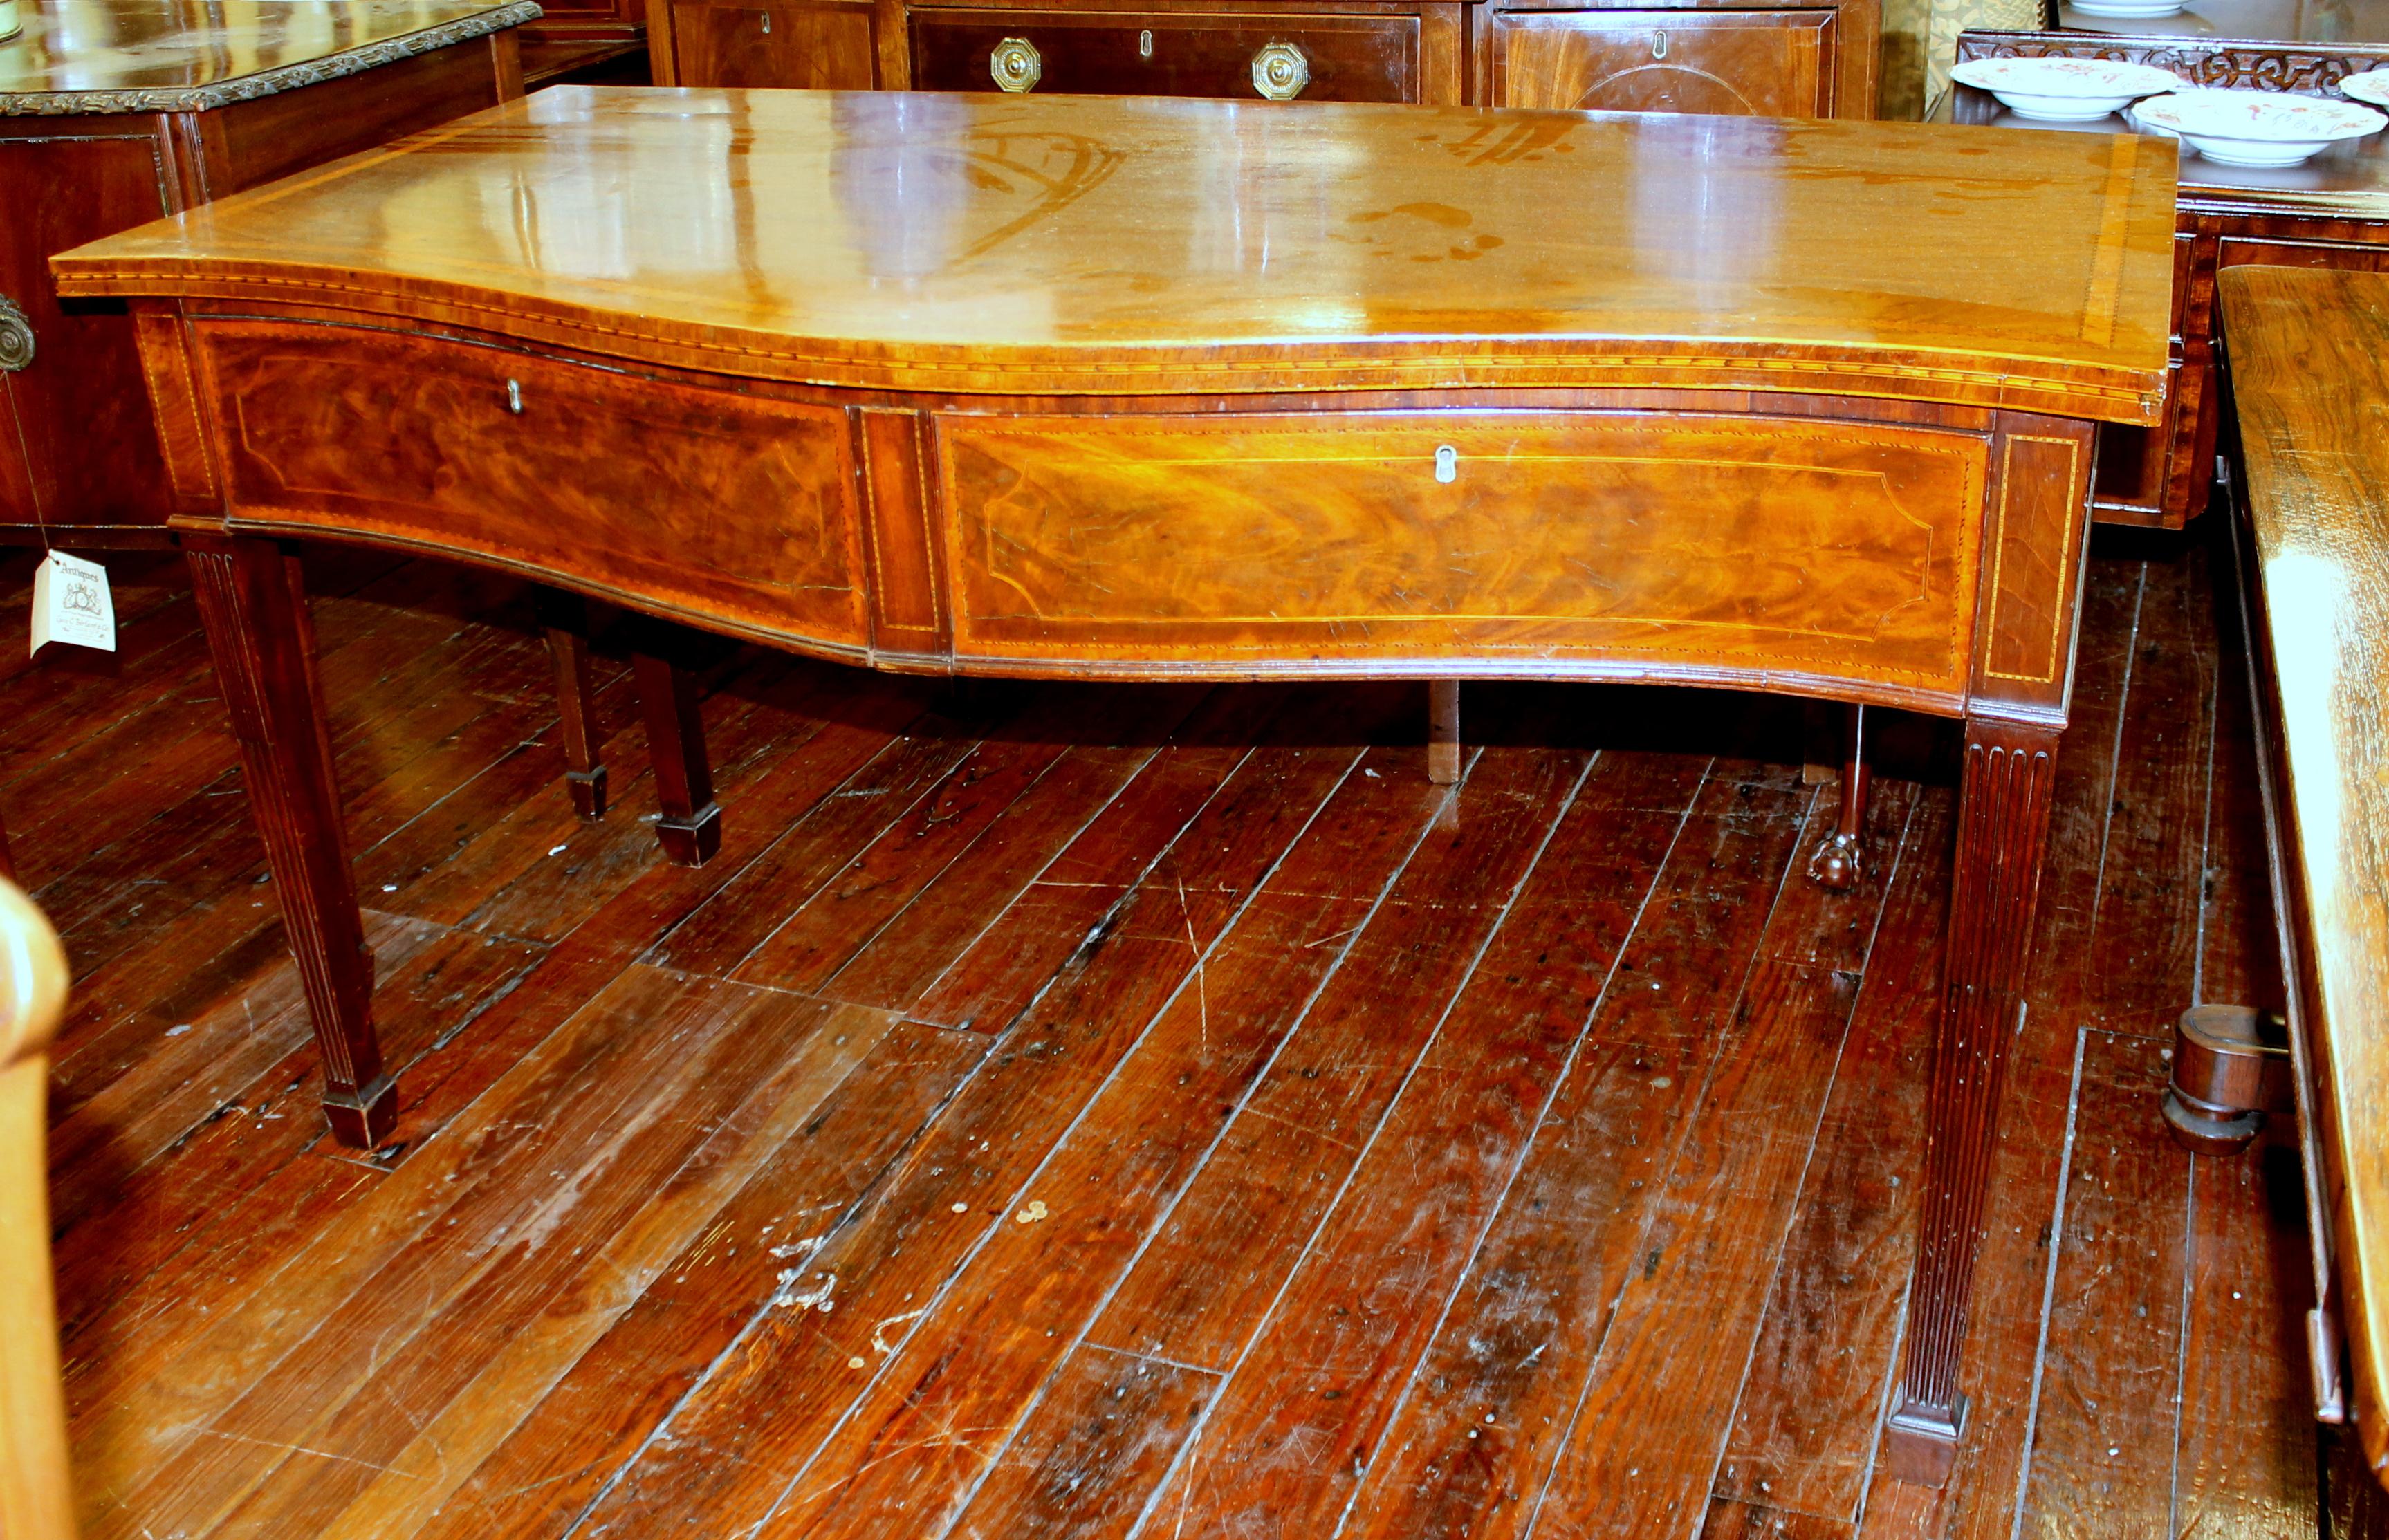 Fabulous quality antique English George III inlaid figured mahogany hunt-board, console or server with book-matched flame mahogany drawers and fabulous inlays throughout; unusually deep and useful size.

Please note exceptional satinwood and